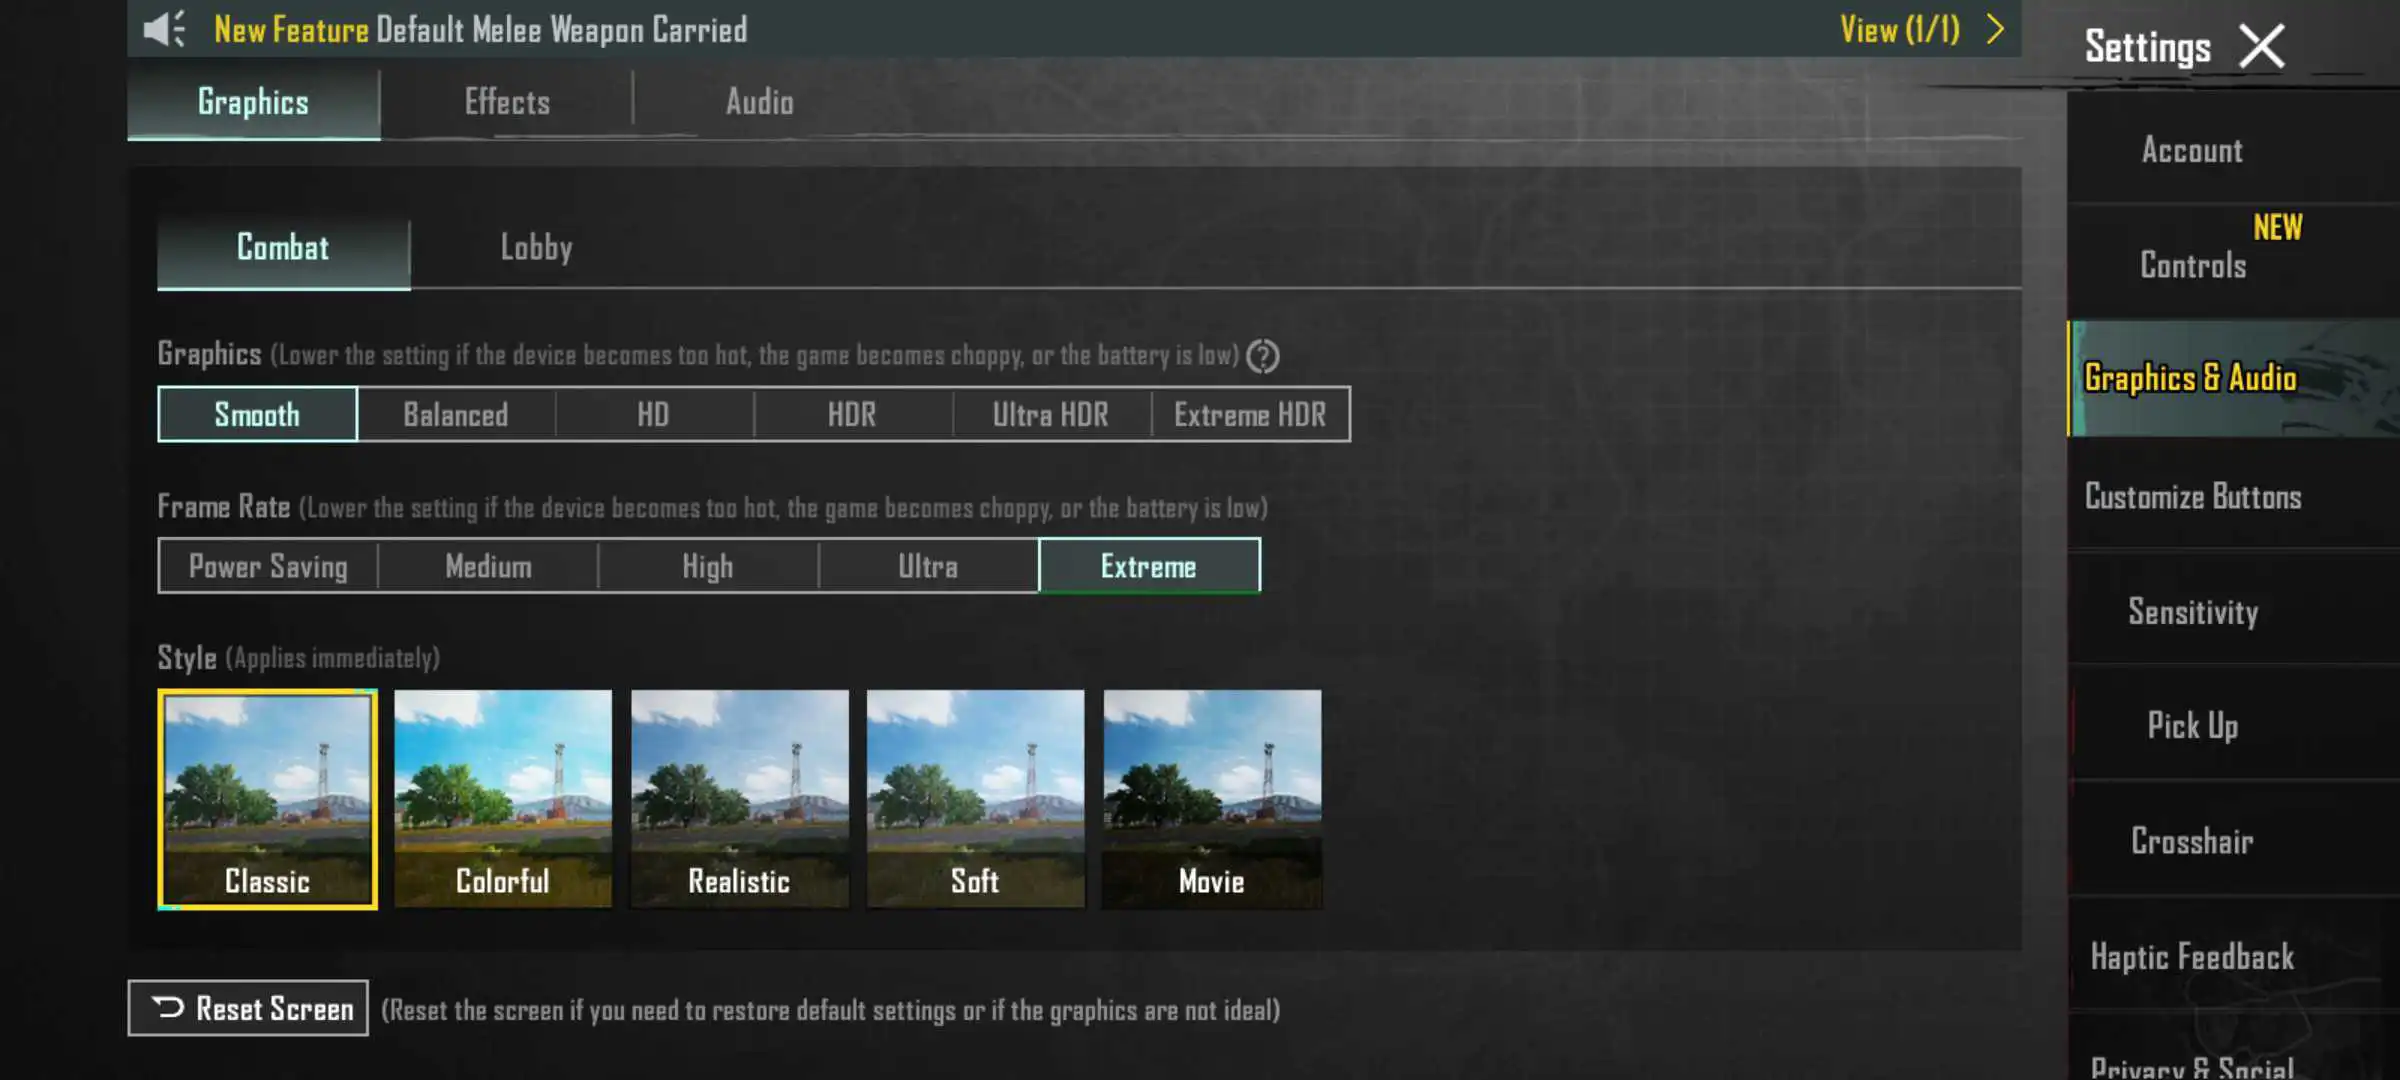 BGMI Graphics Settings to adjust quality and FPS